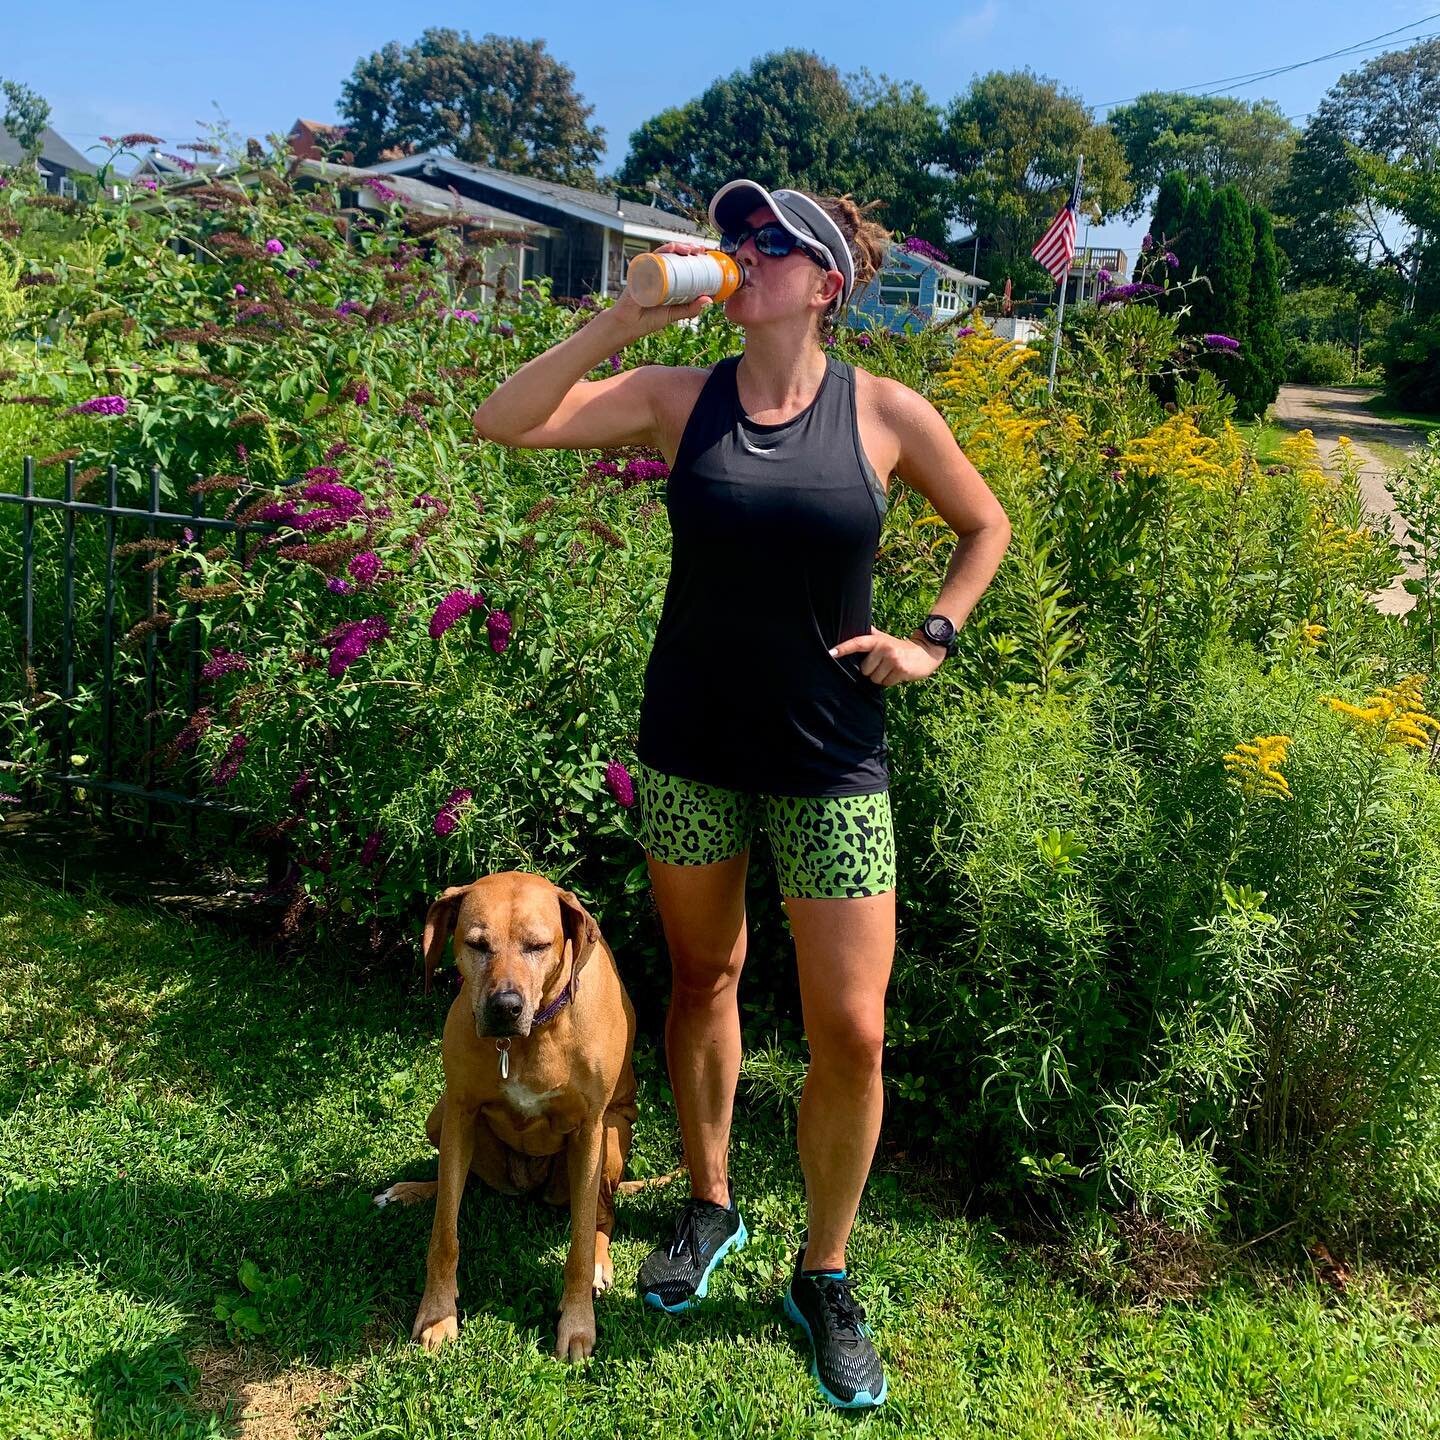 Workout ✅ give me fluids ASAP!!! 2 mile warm up, 10x2minutes and 2 mile cool down. I did these on dirt roads so less pavement pounding on my legs. Thanks goodness for an extremely kind woman who saw me during my 4th rep rest and said I looked like I 